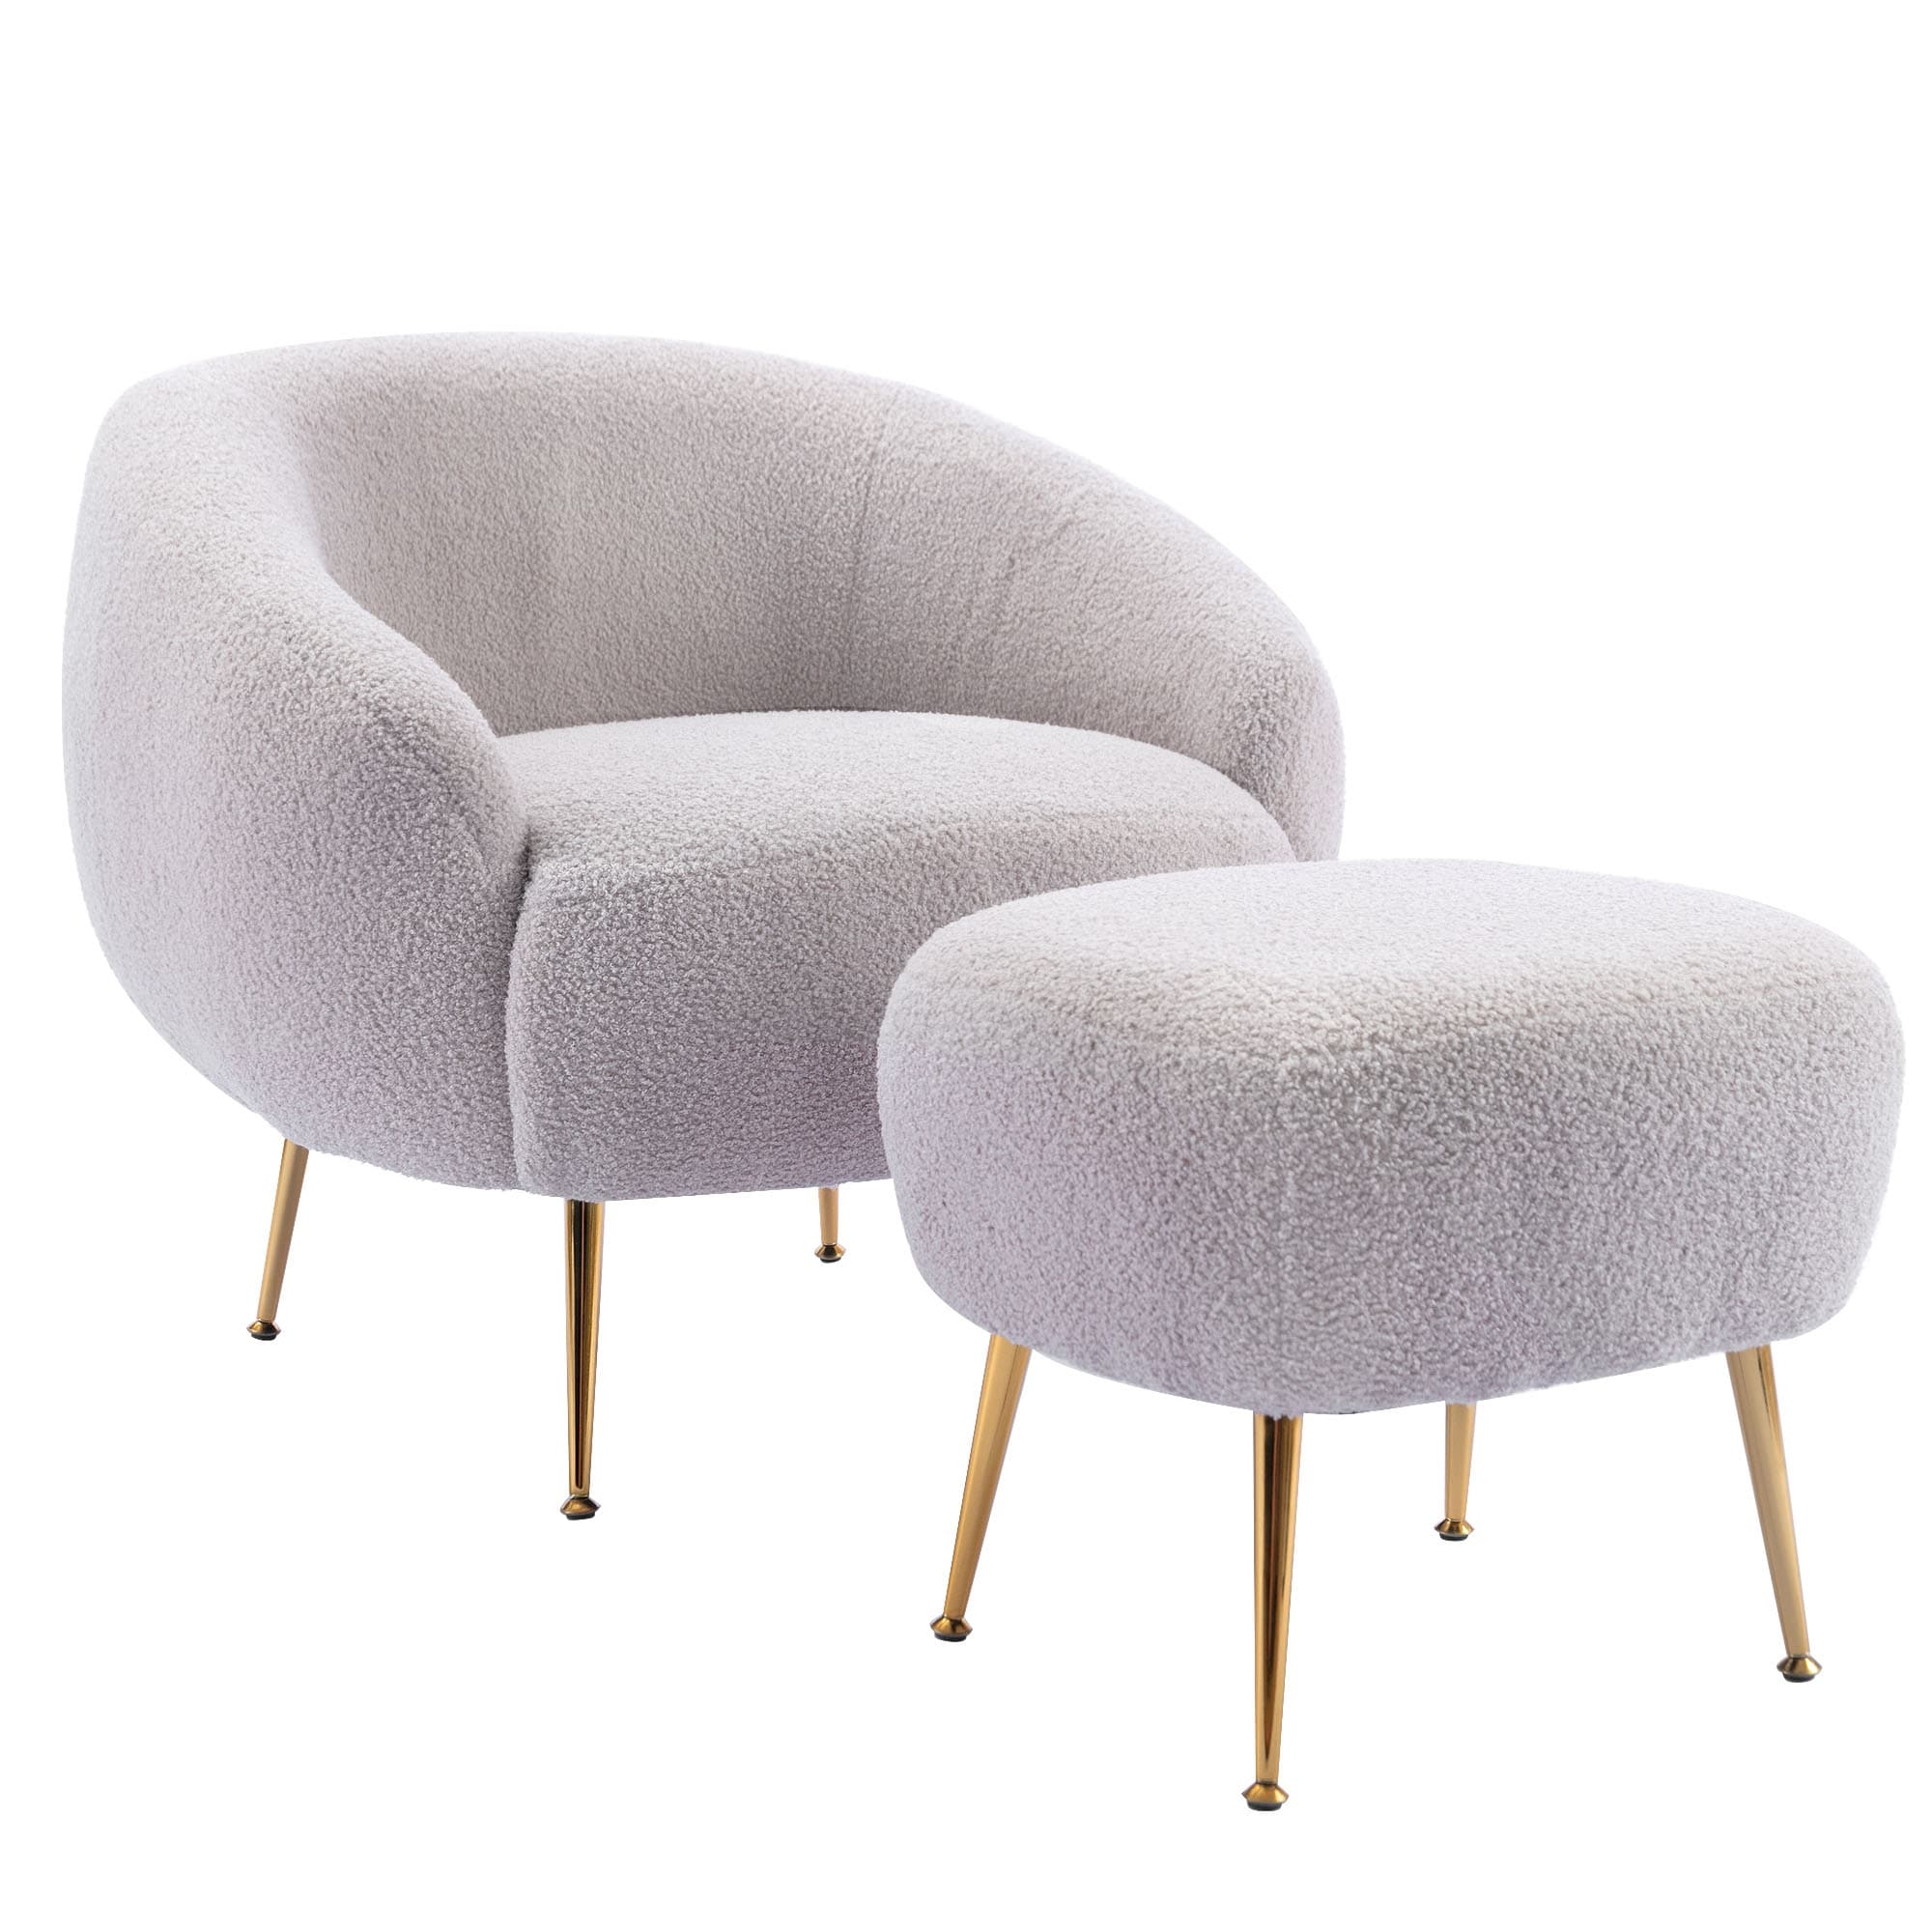 https://ak1.ostkcdn.com/images/products/is/images/direct/41dd6438d12f8e7891f8d87c40bd4709588efd56/Modern-Comfy-Leisure-Accent-Chair%2C-Teddy-Short-Plush-Particle-Velvet-Armchair%2C-Living-Room-Chair-%26-Ottoman-Sets-with-Metal-Leg.jpg